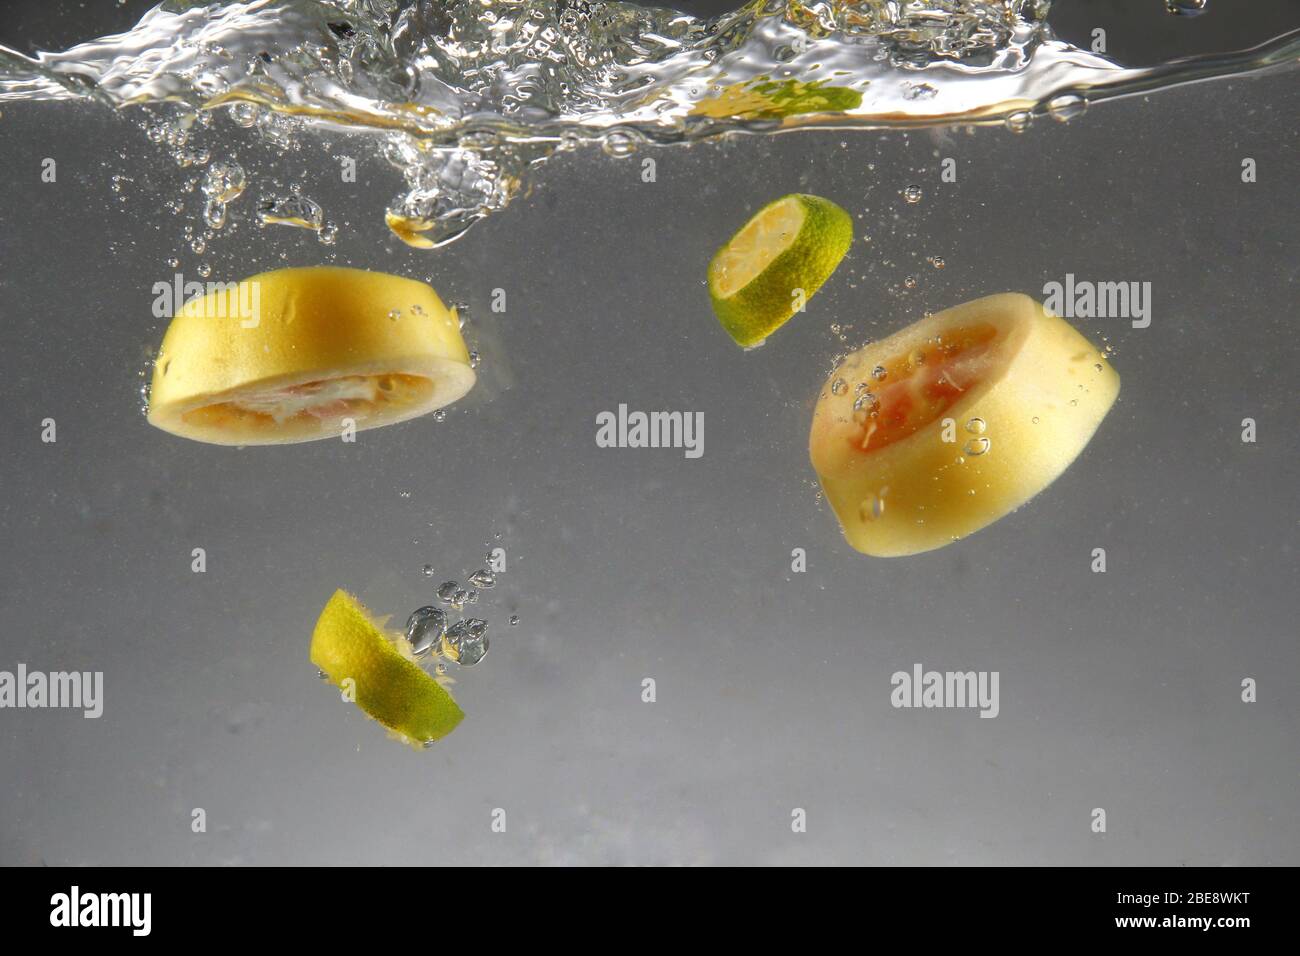 Photo of fresh sliced tomato and calamansi dropped in water Stock Photo